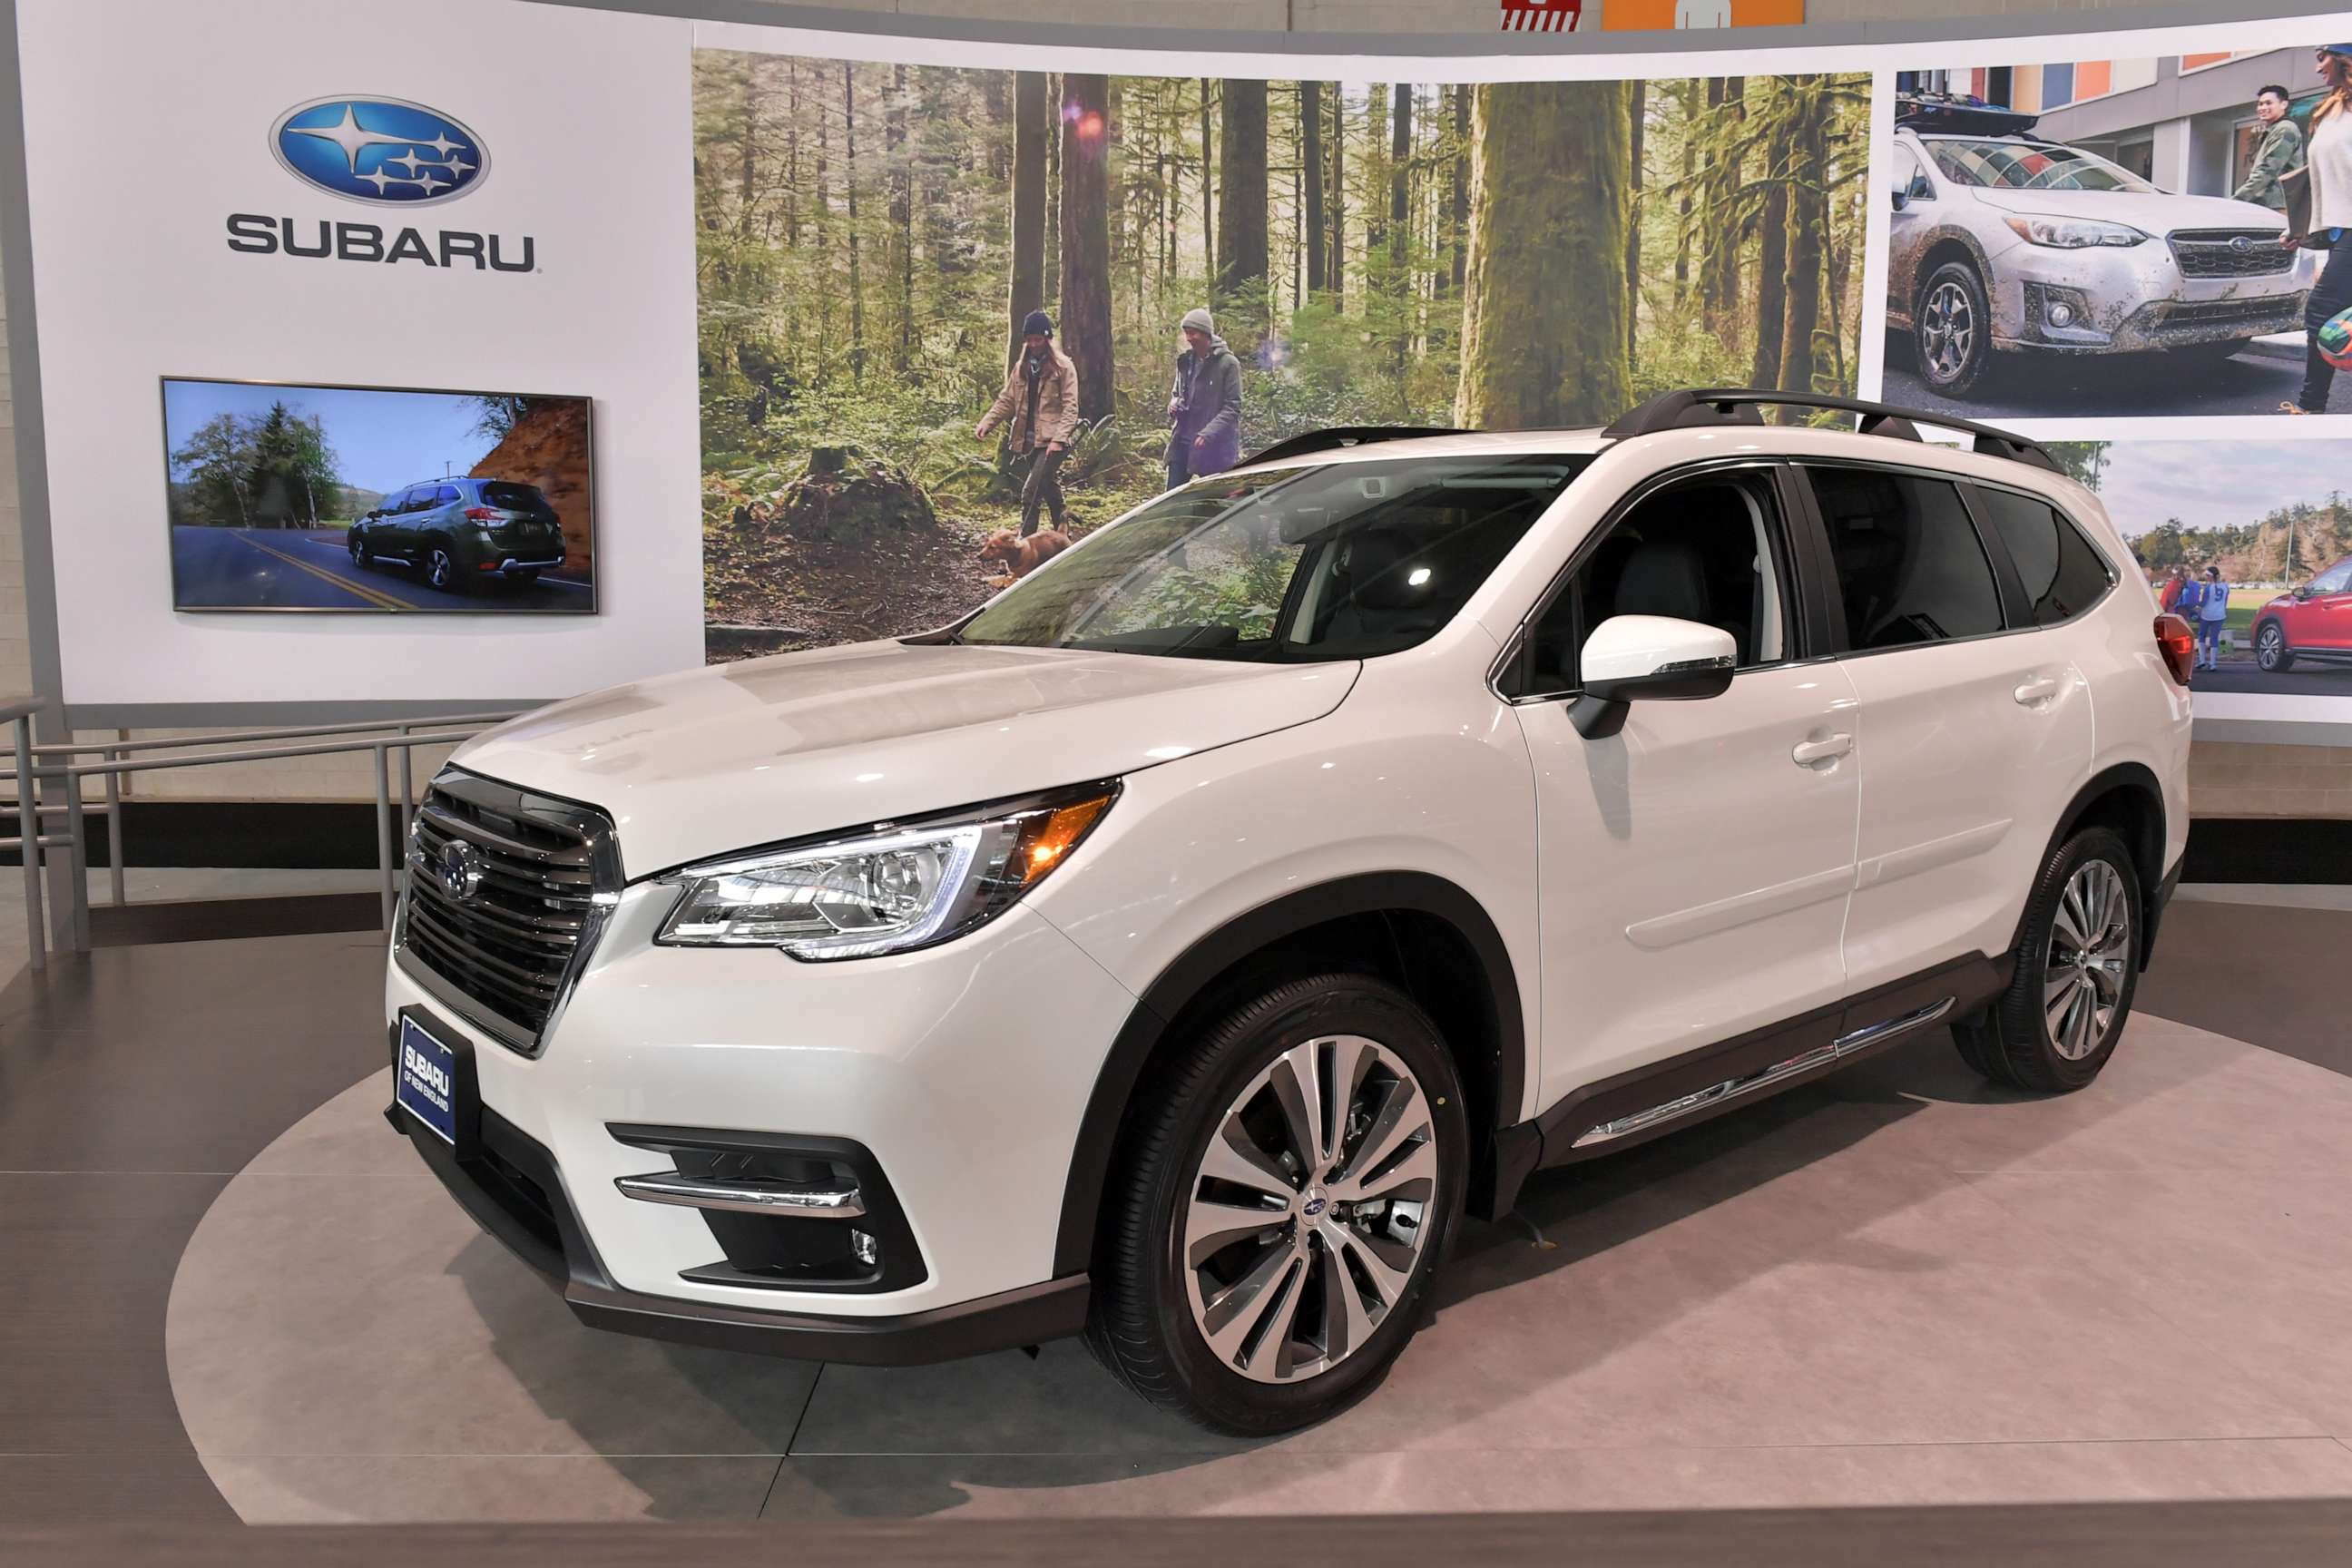 PHOTO: The Subaru 2019 Ascent is seen at the 2019 New England International Auto Show Press Preview at Boston Convention & Exhibition Center on Jan. 17, 2019 in Boston.